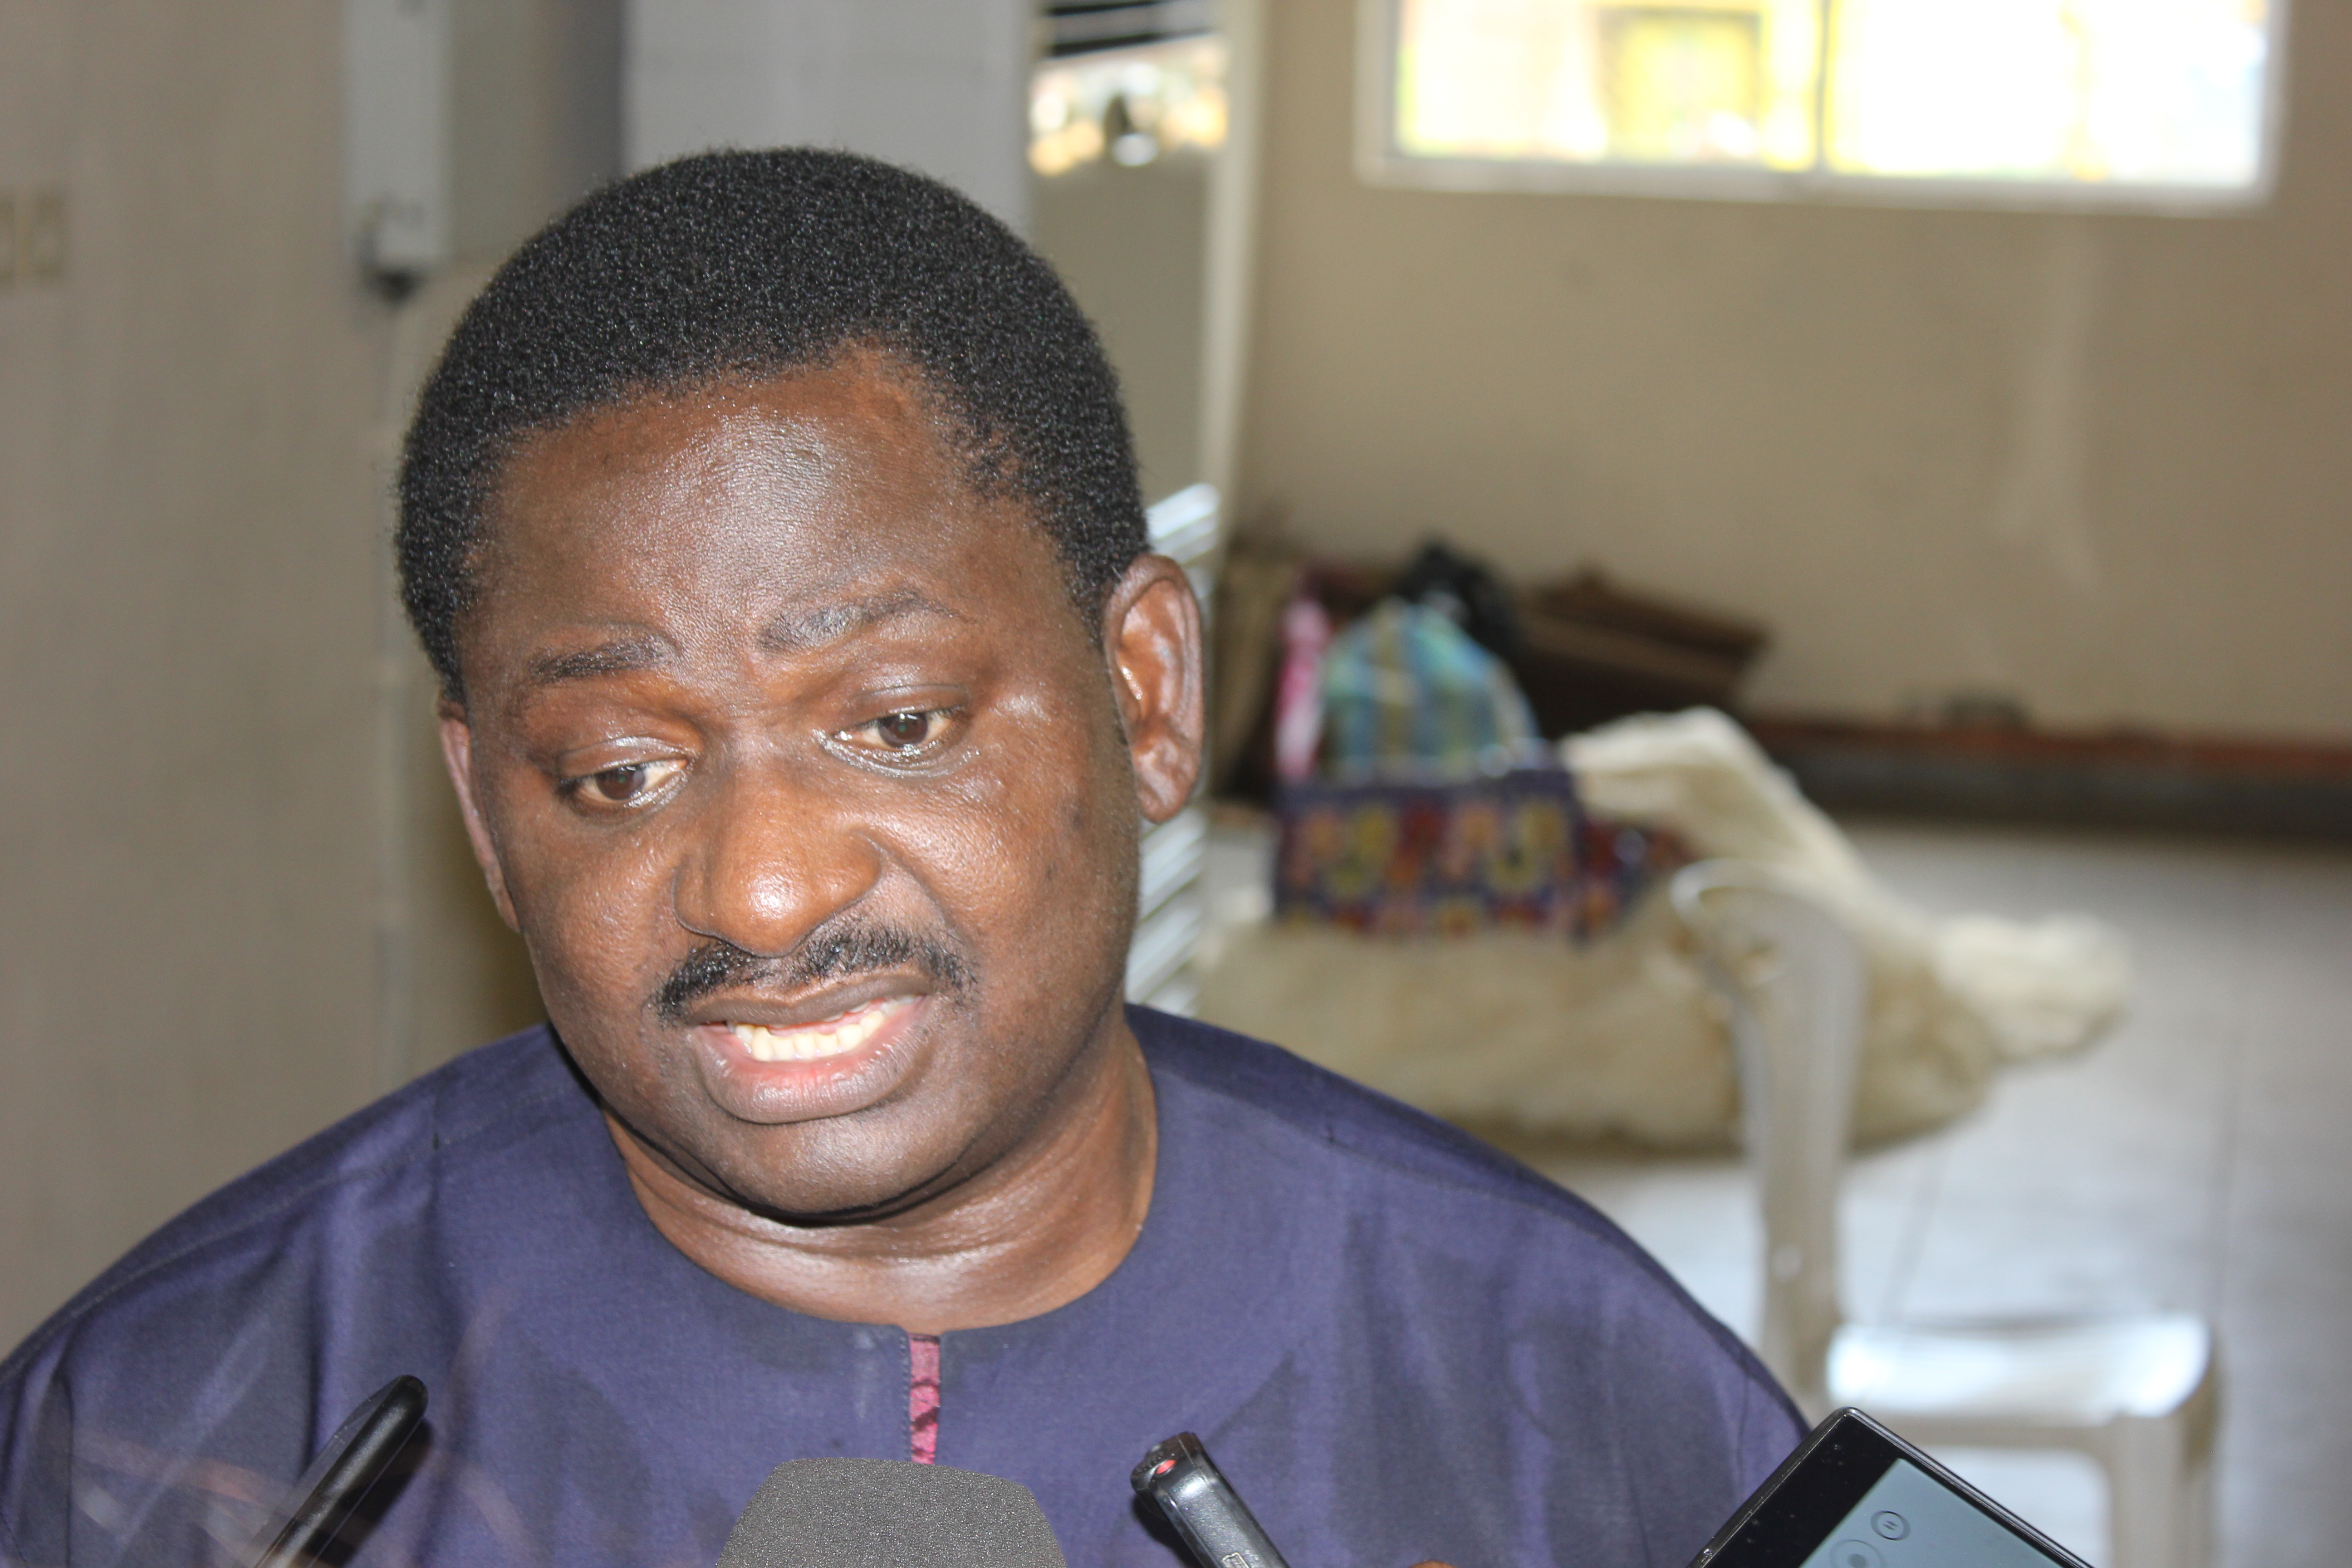 Mr Femi Adesina, Special Adviser to the President on Media and Publicity being interviewed by Journalists at the event! - UNILAG 103.1FM, THE SUN NEWSPAPERS, TVC AND THE GUARDIAN NEWSPAPERS!